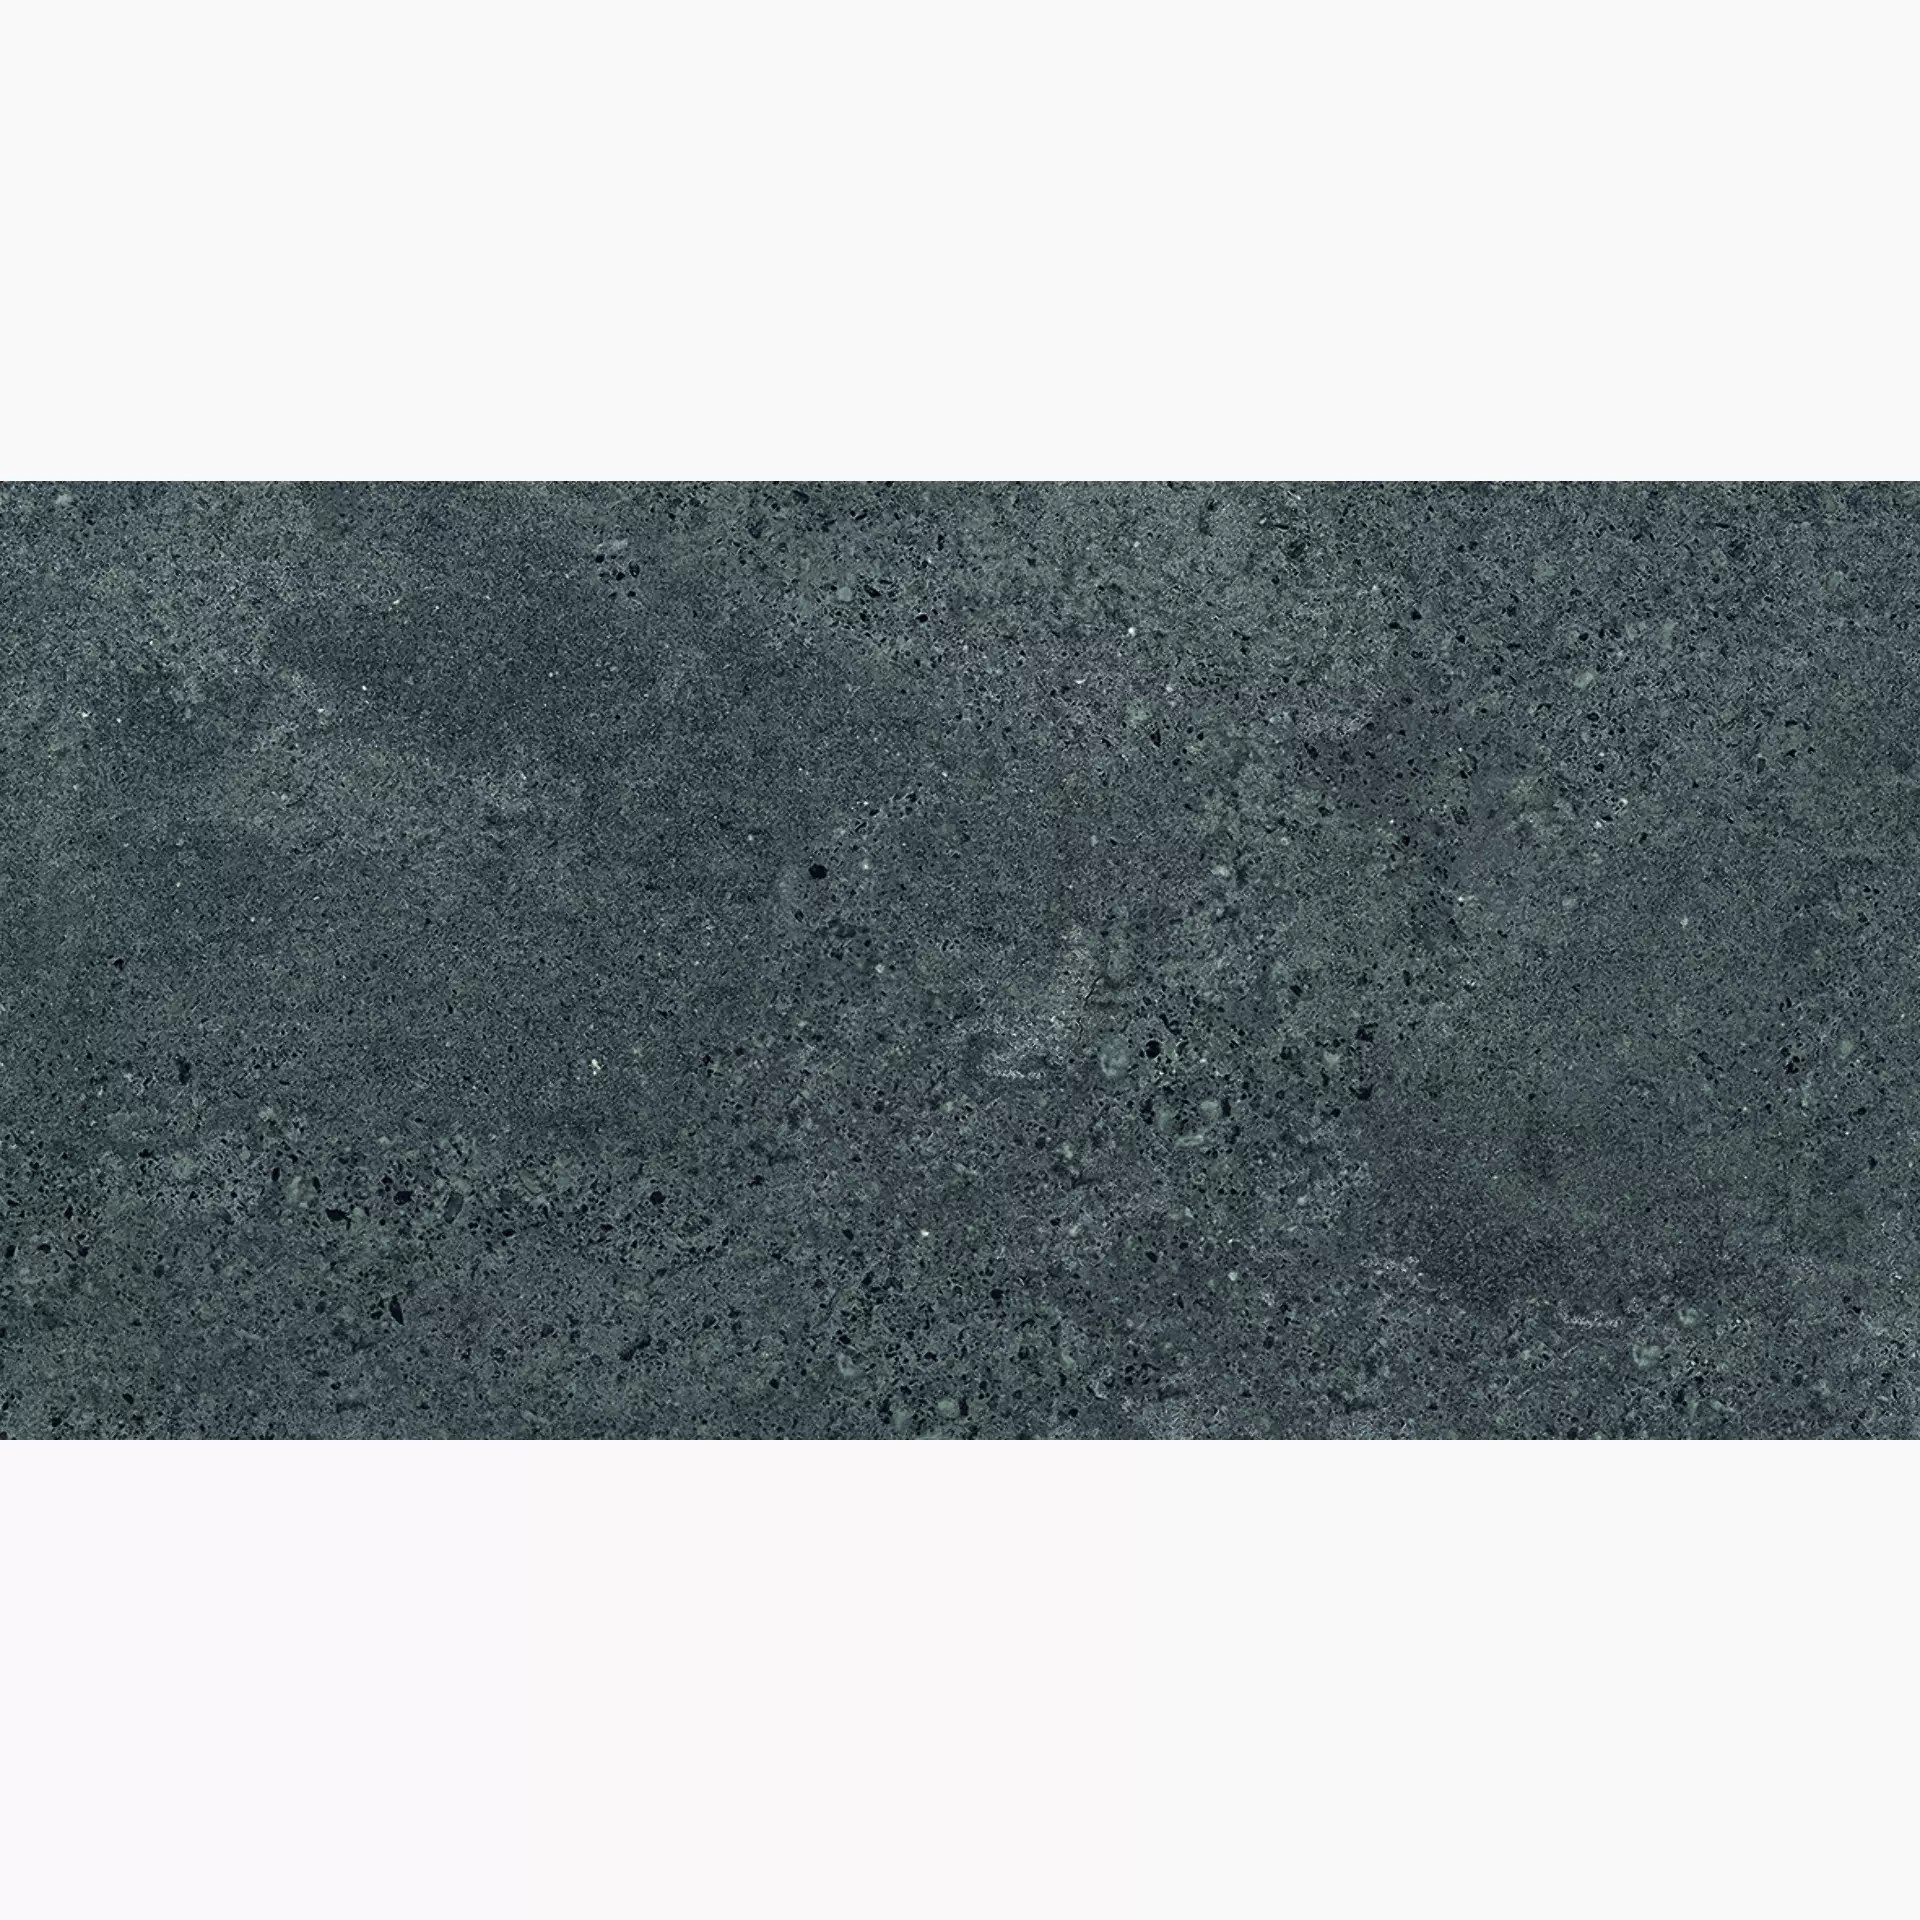 Provenza Re-Play Concrete Anthracite Naturale Recupero EK7K 30x60cm rectified 9,5mm